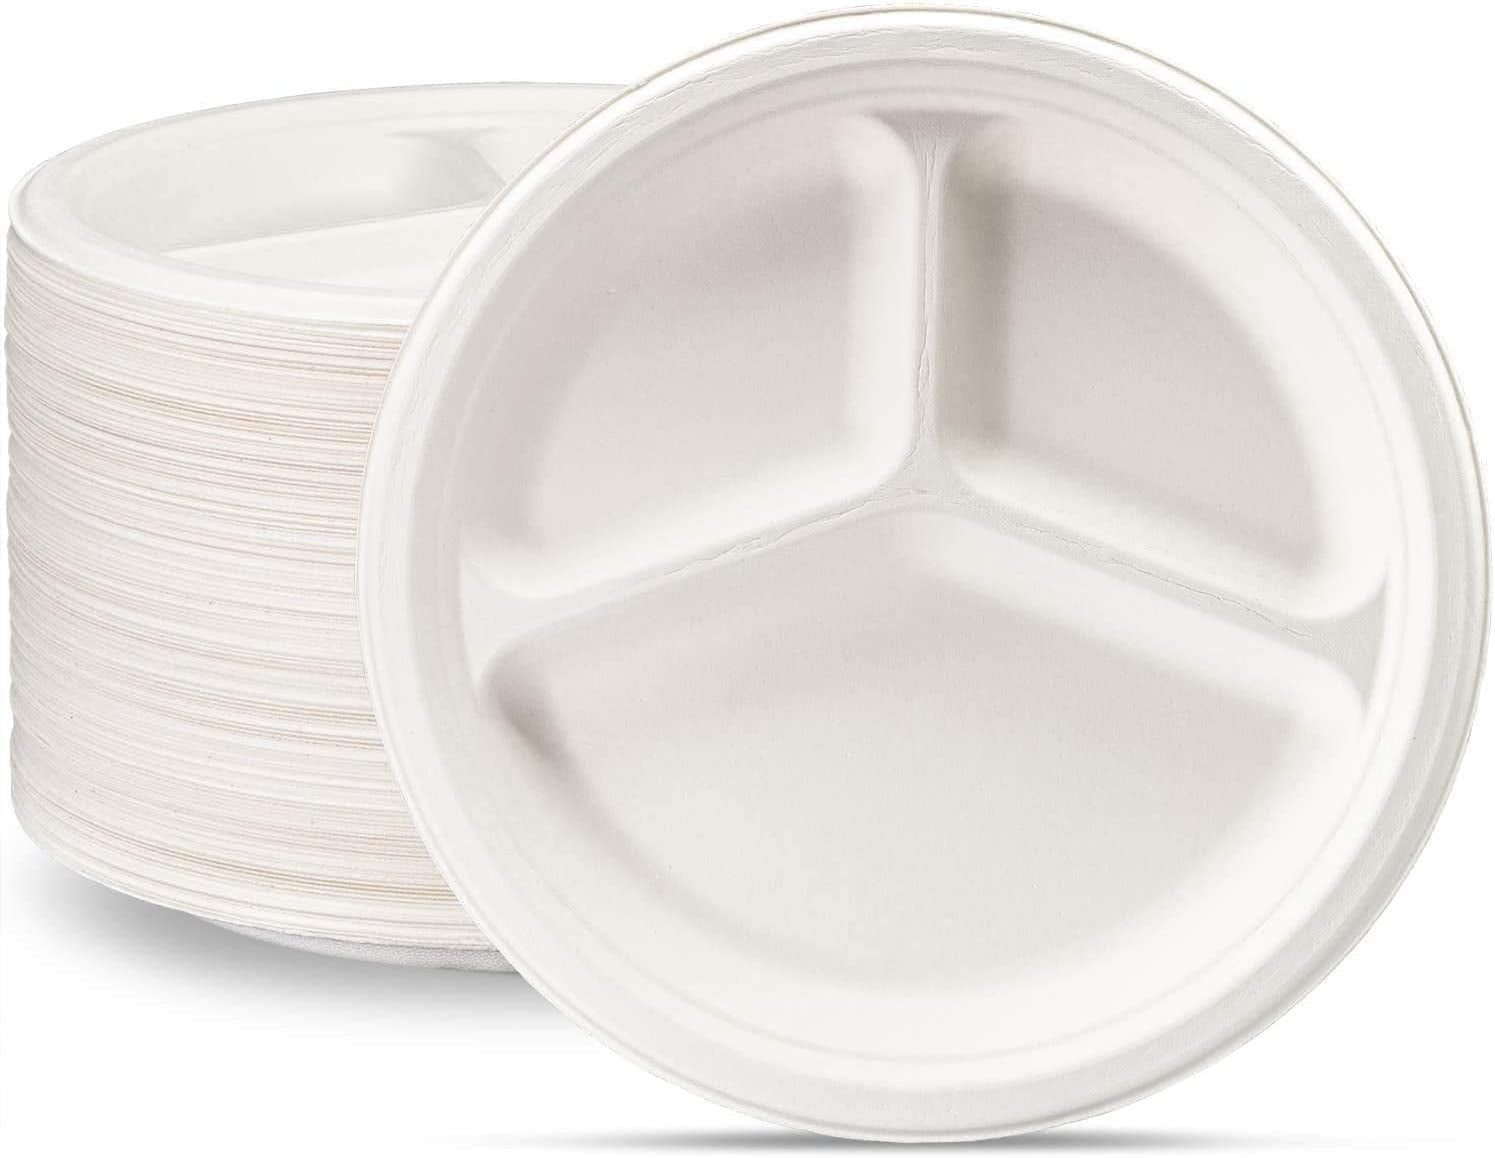 Comfy Package Round Compostable Plates Disposable Heavy Duty Paper Plates  Bulk, 125-Pack 